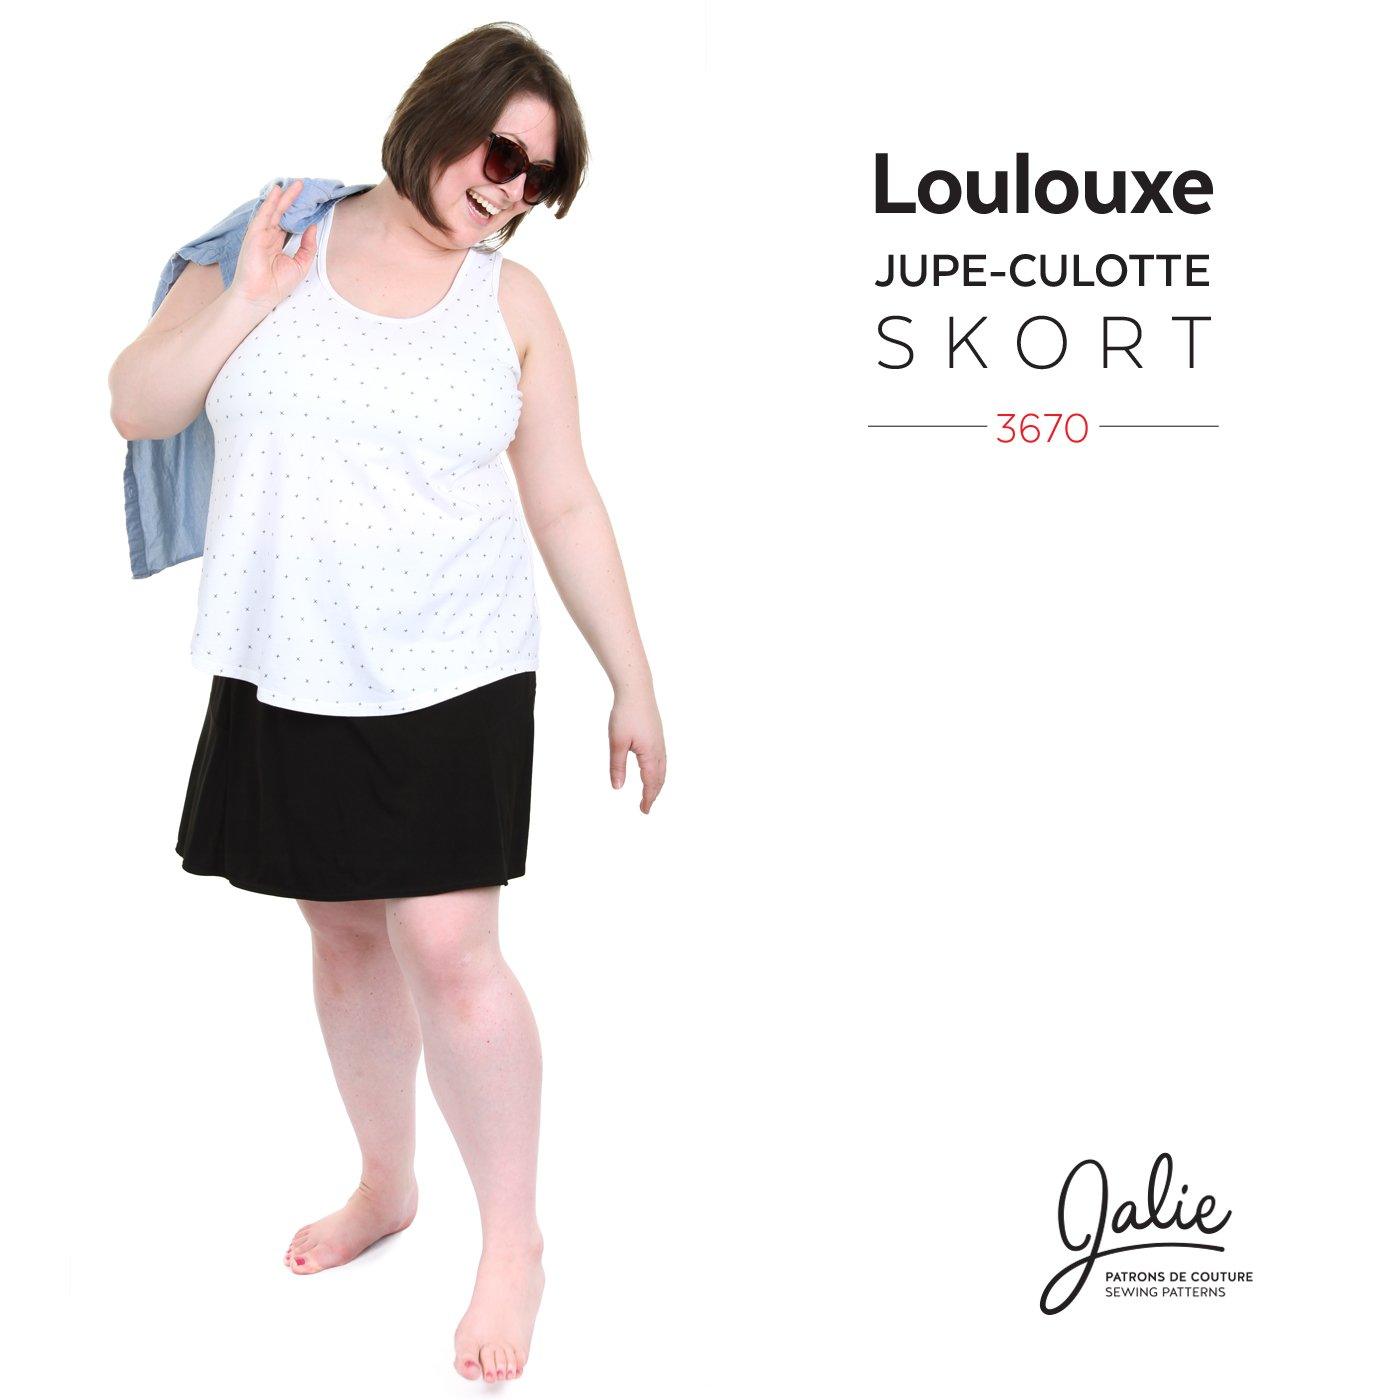 Jalie 3670 - LOULOUXE - Skort in ITY knit